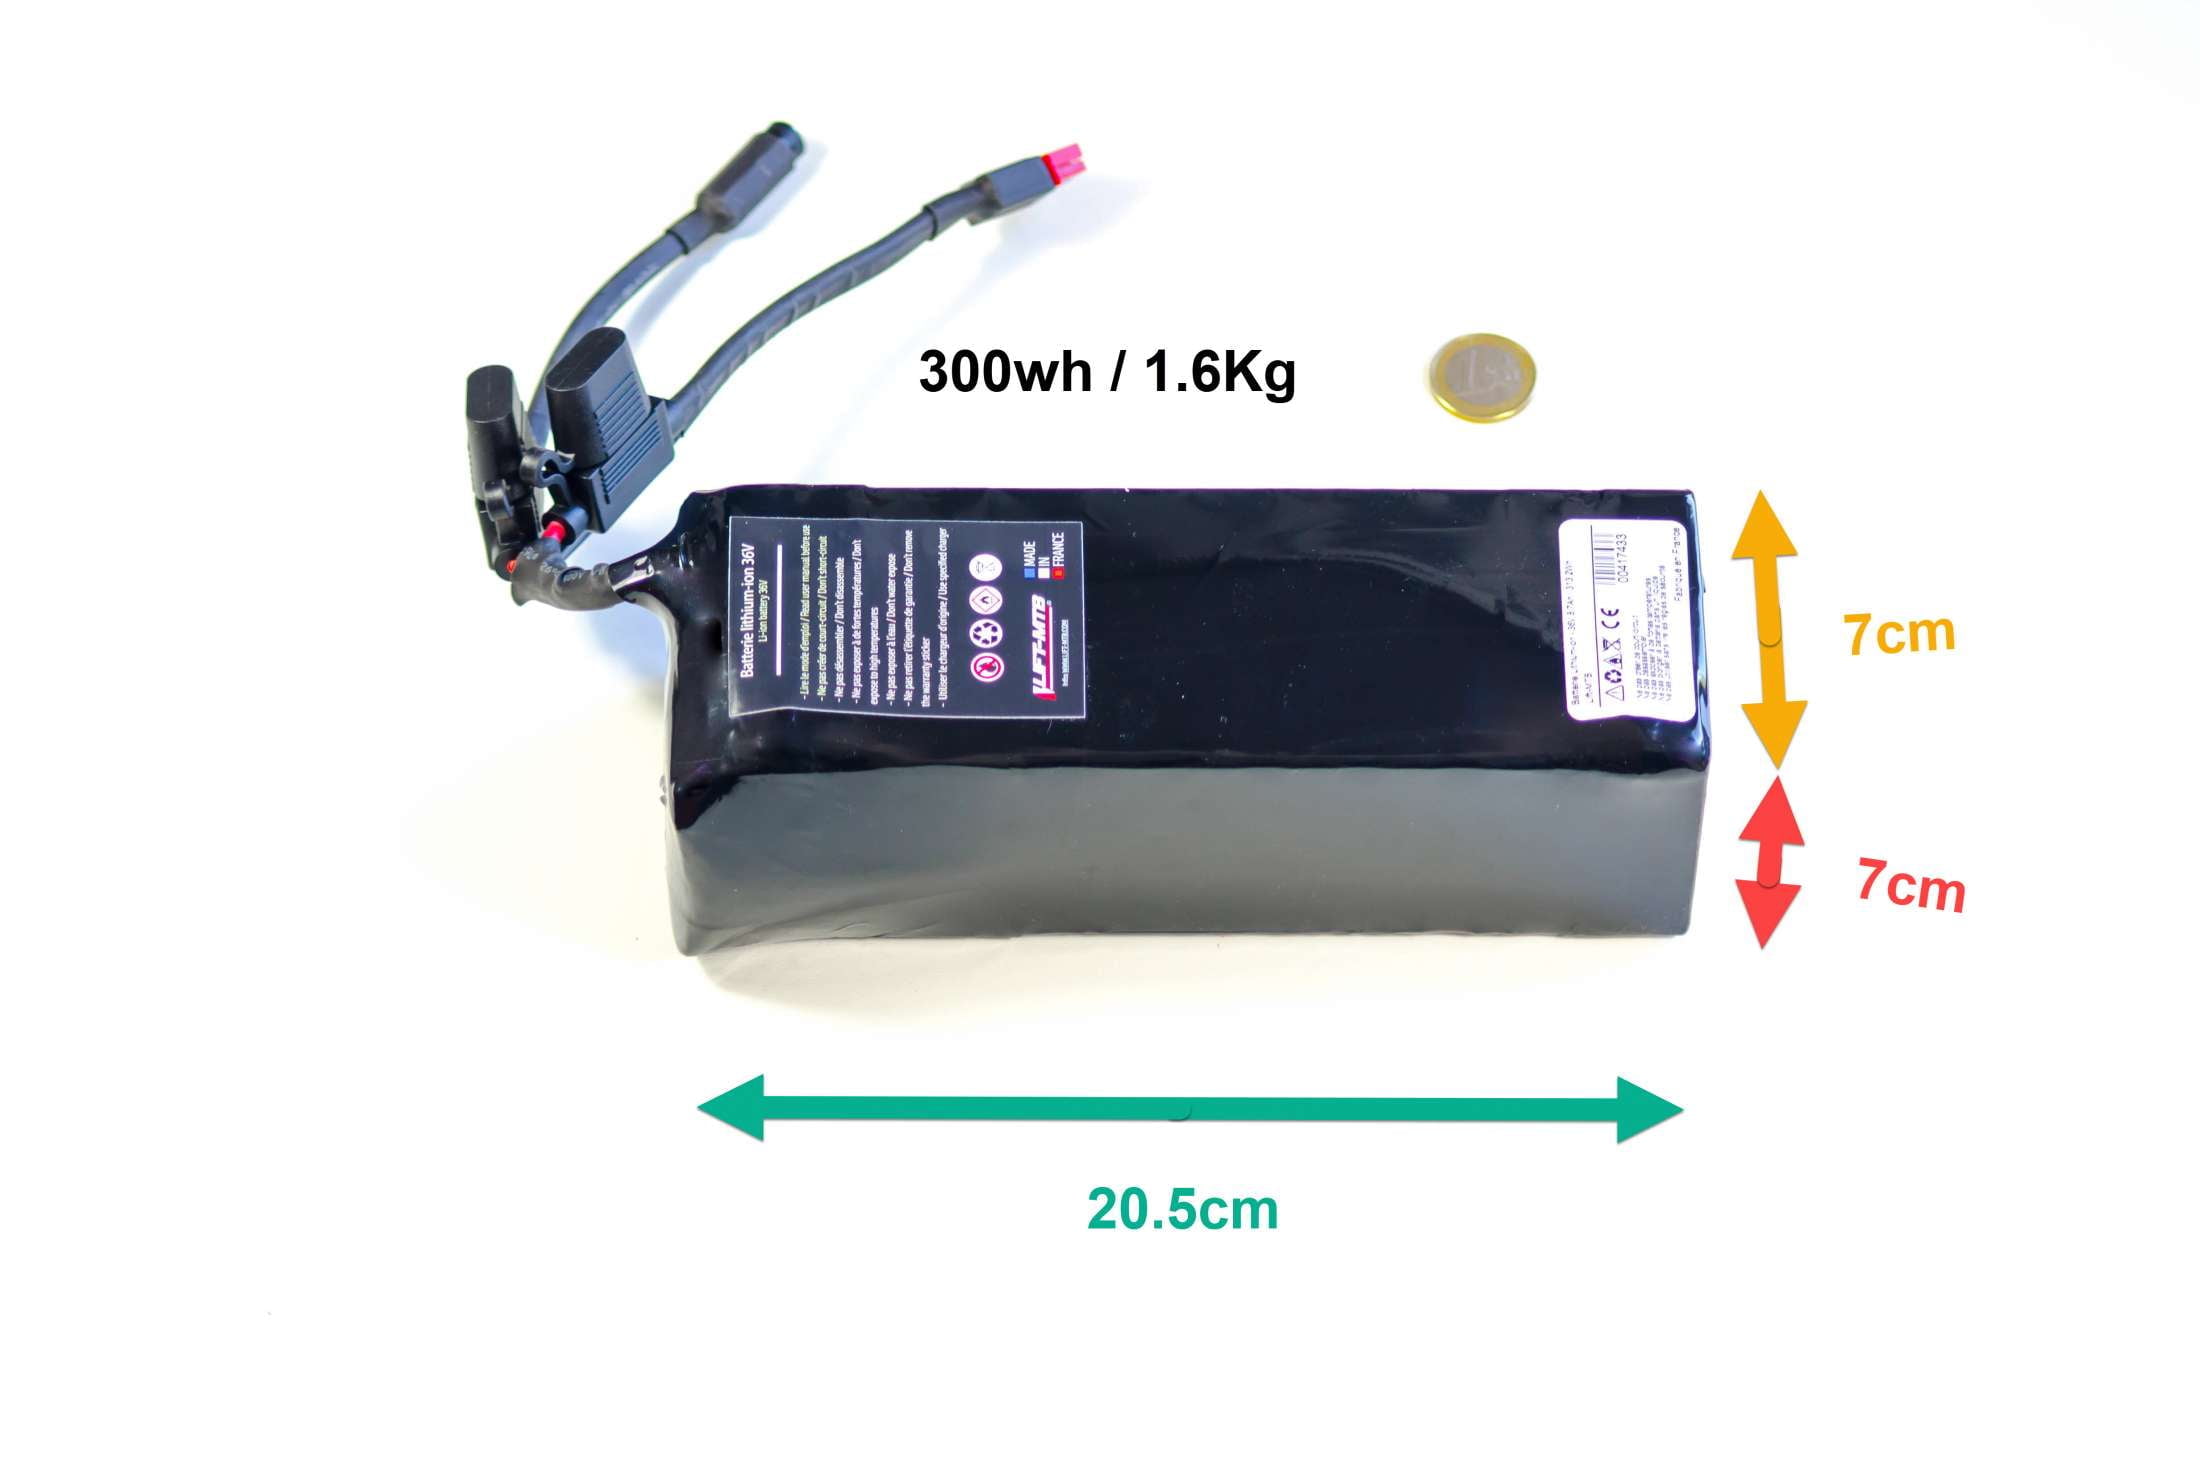 500 Wh electric battery for LIFT-MTB pedal motor kit.